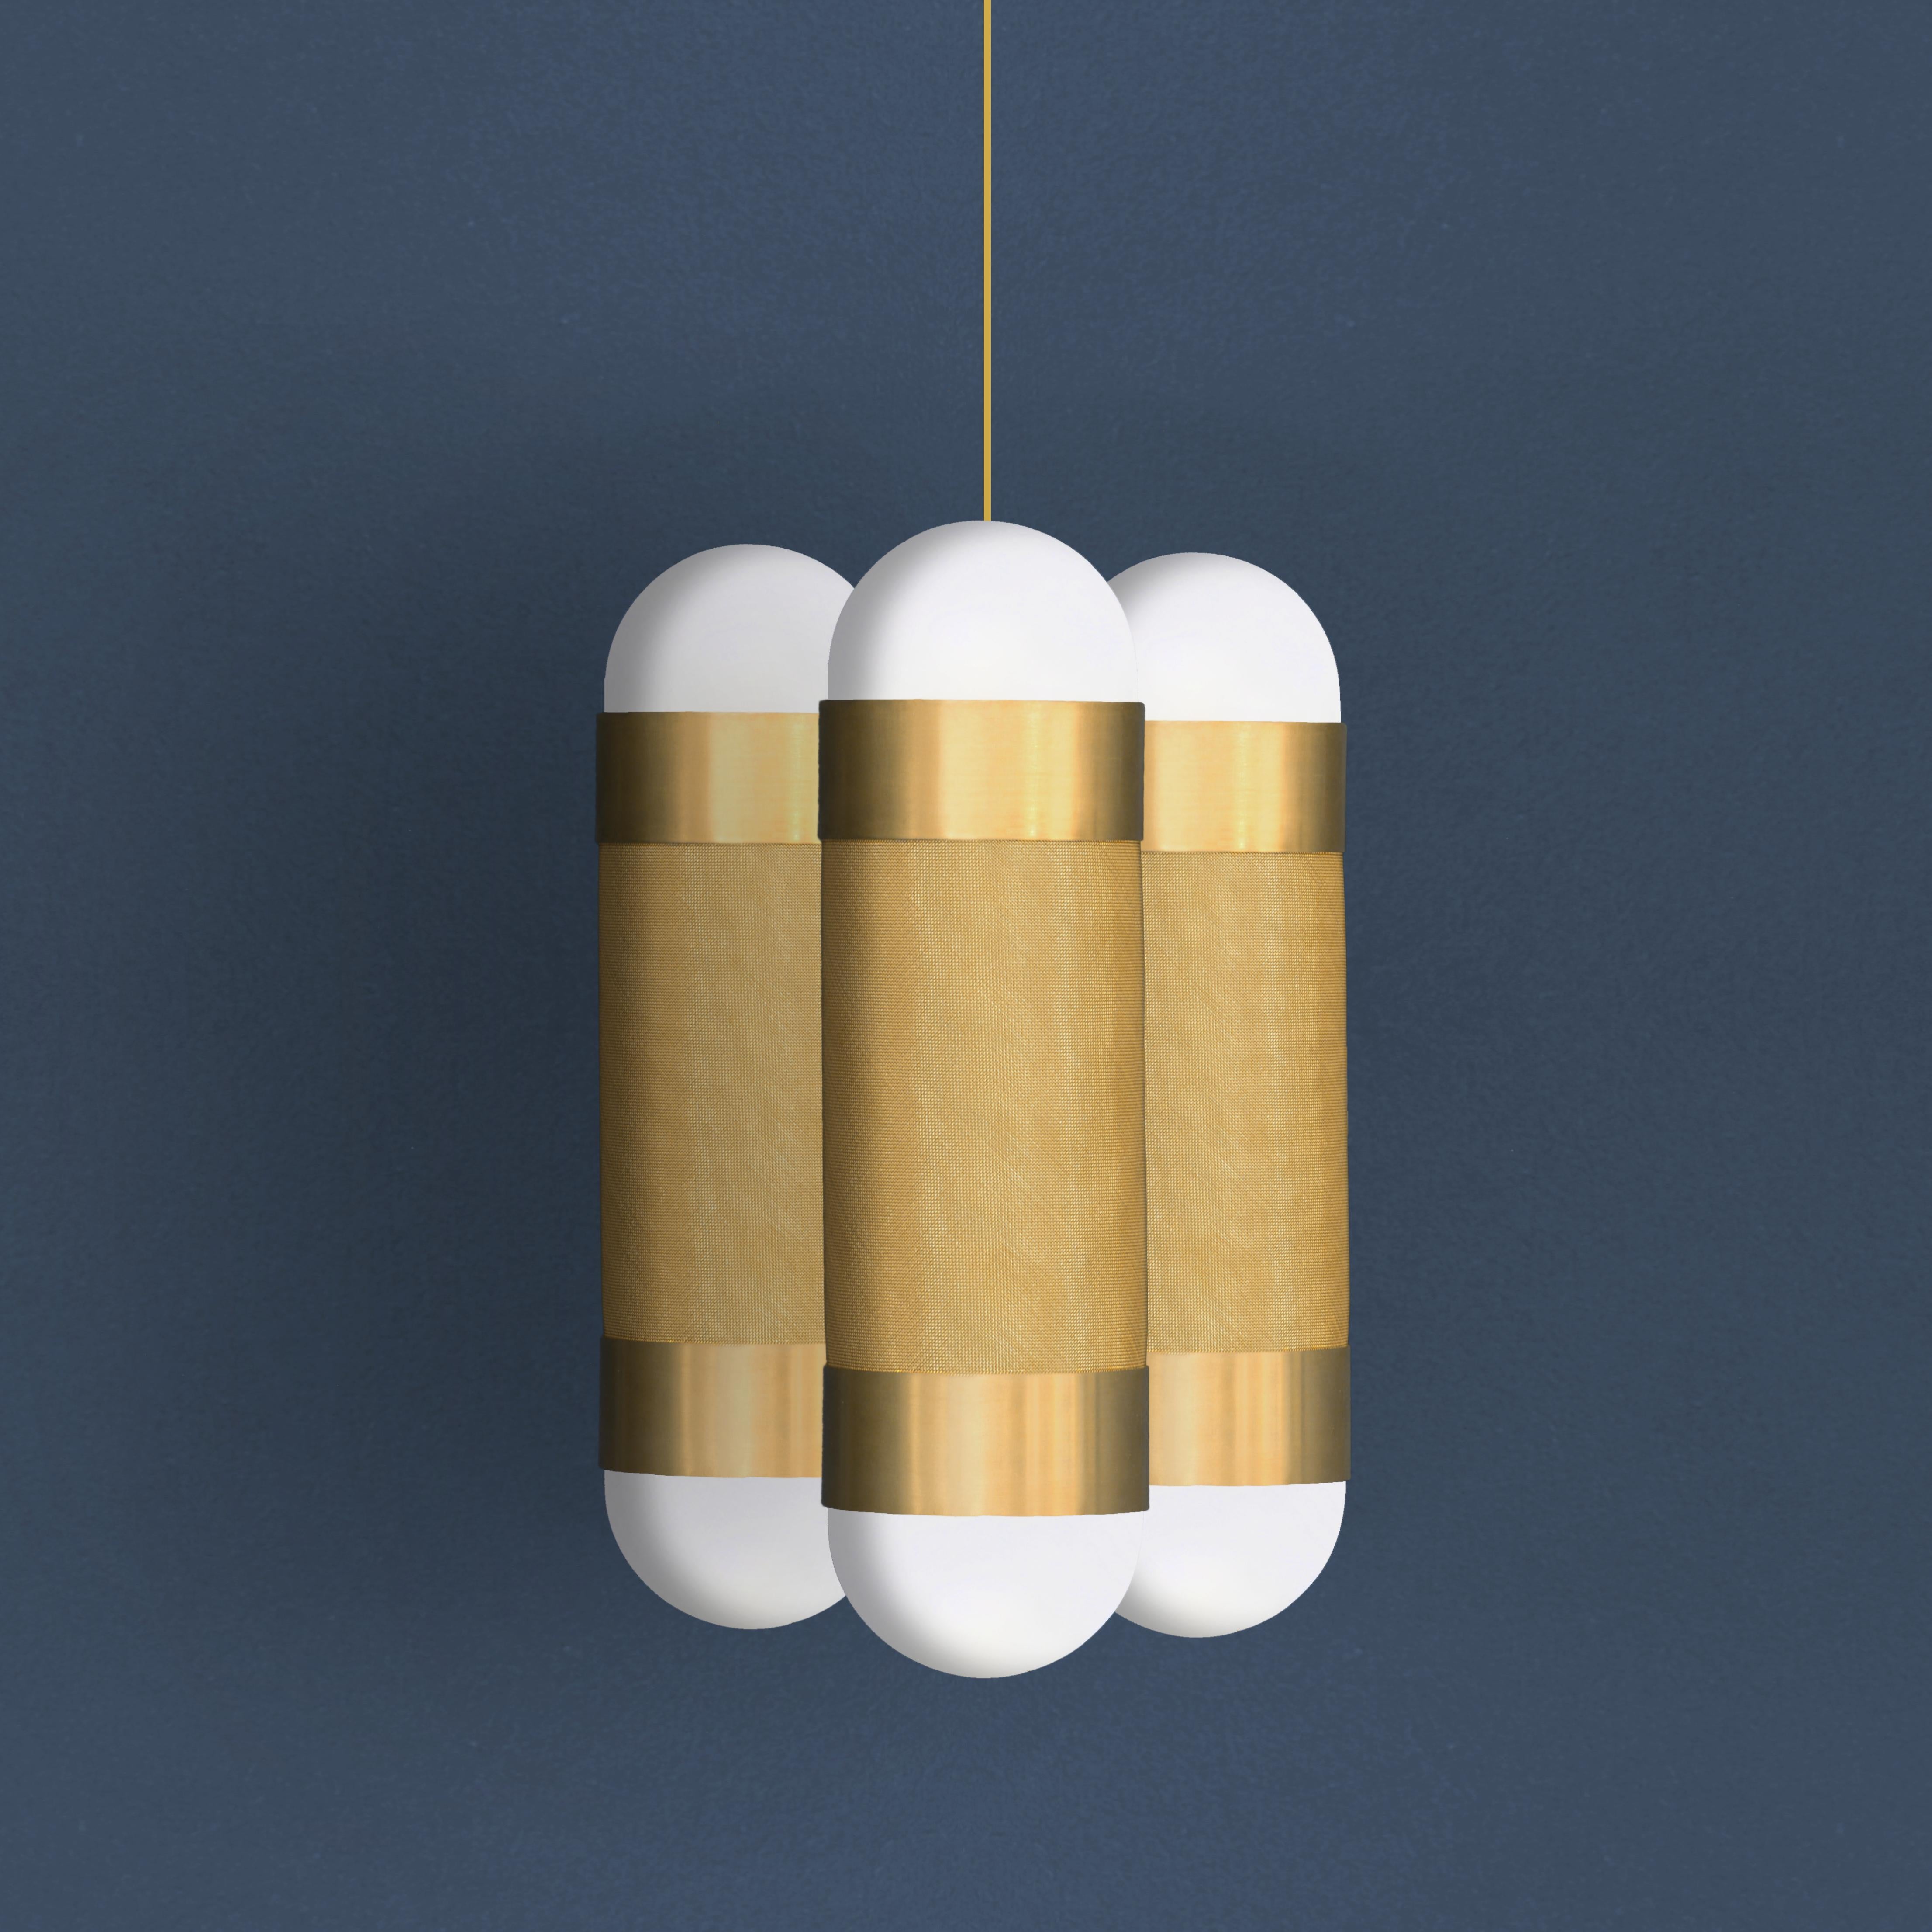 The LOOM cluster light is defined by its signature woven brass cylinders topped with hand-brushed brass sleeves and completed with soft-white borosilicate glass domes, all beautifully nestled together. 

When illuminated the LOOM emanates a soft,